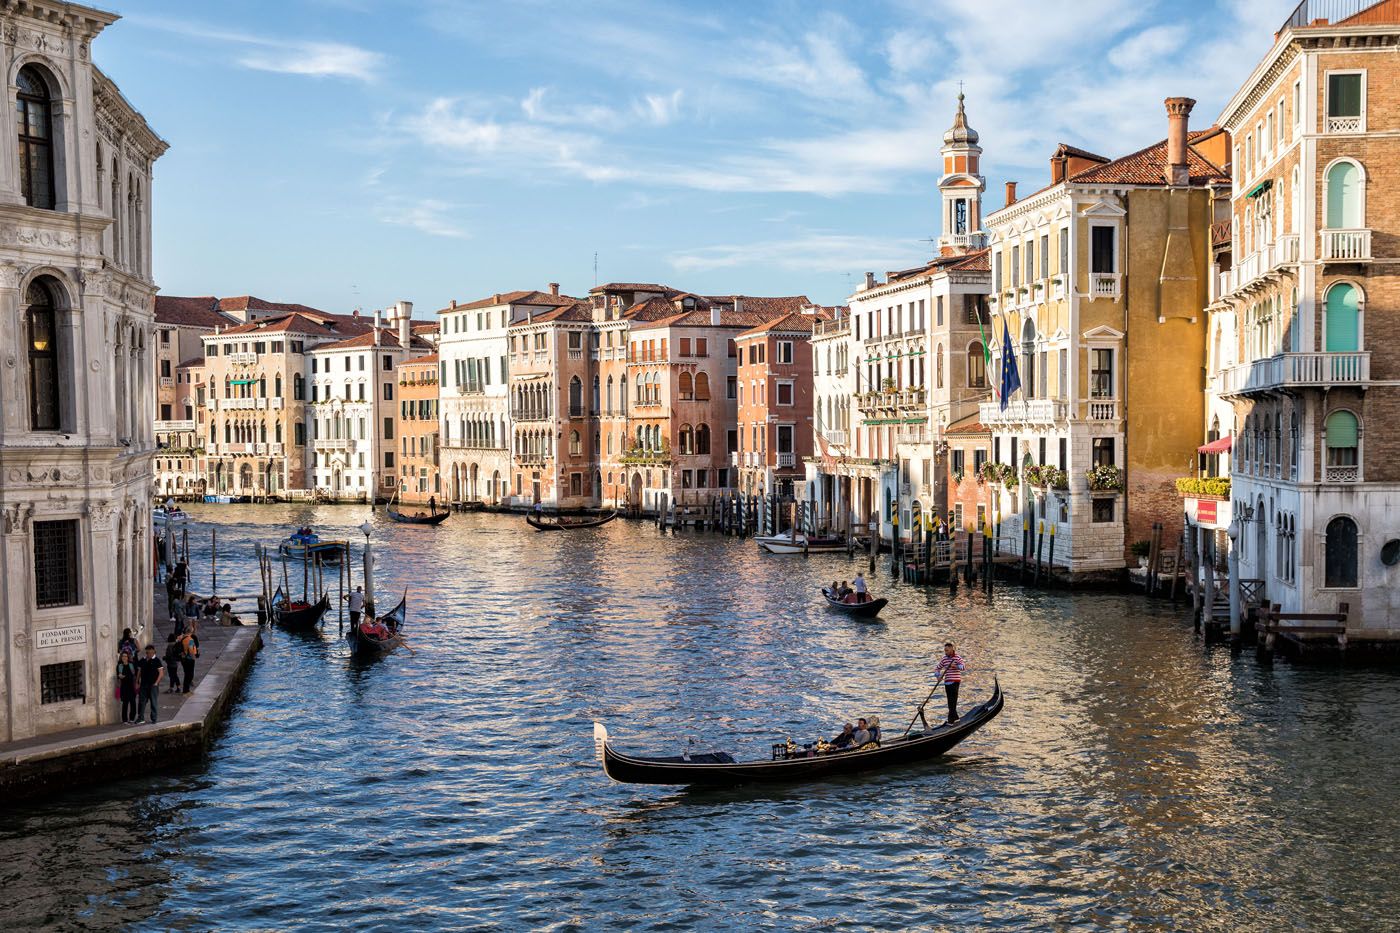 Grand Canal of Venice 2 days in Venice itinerary